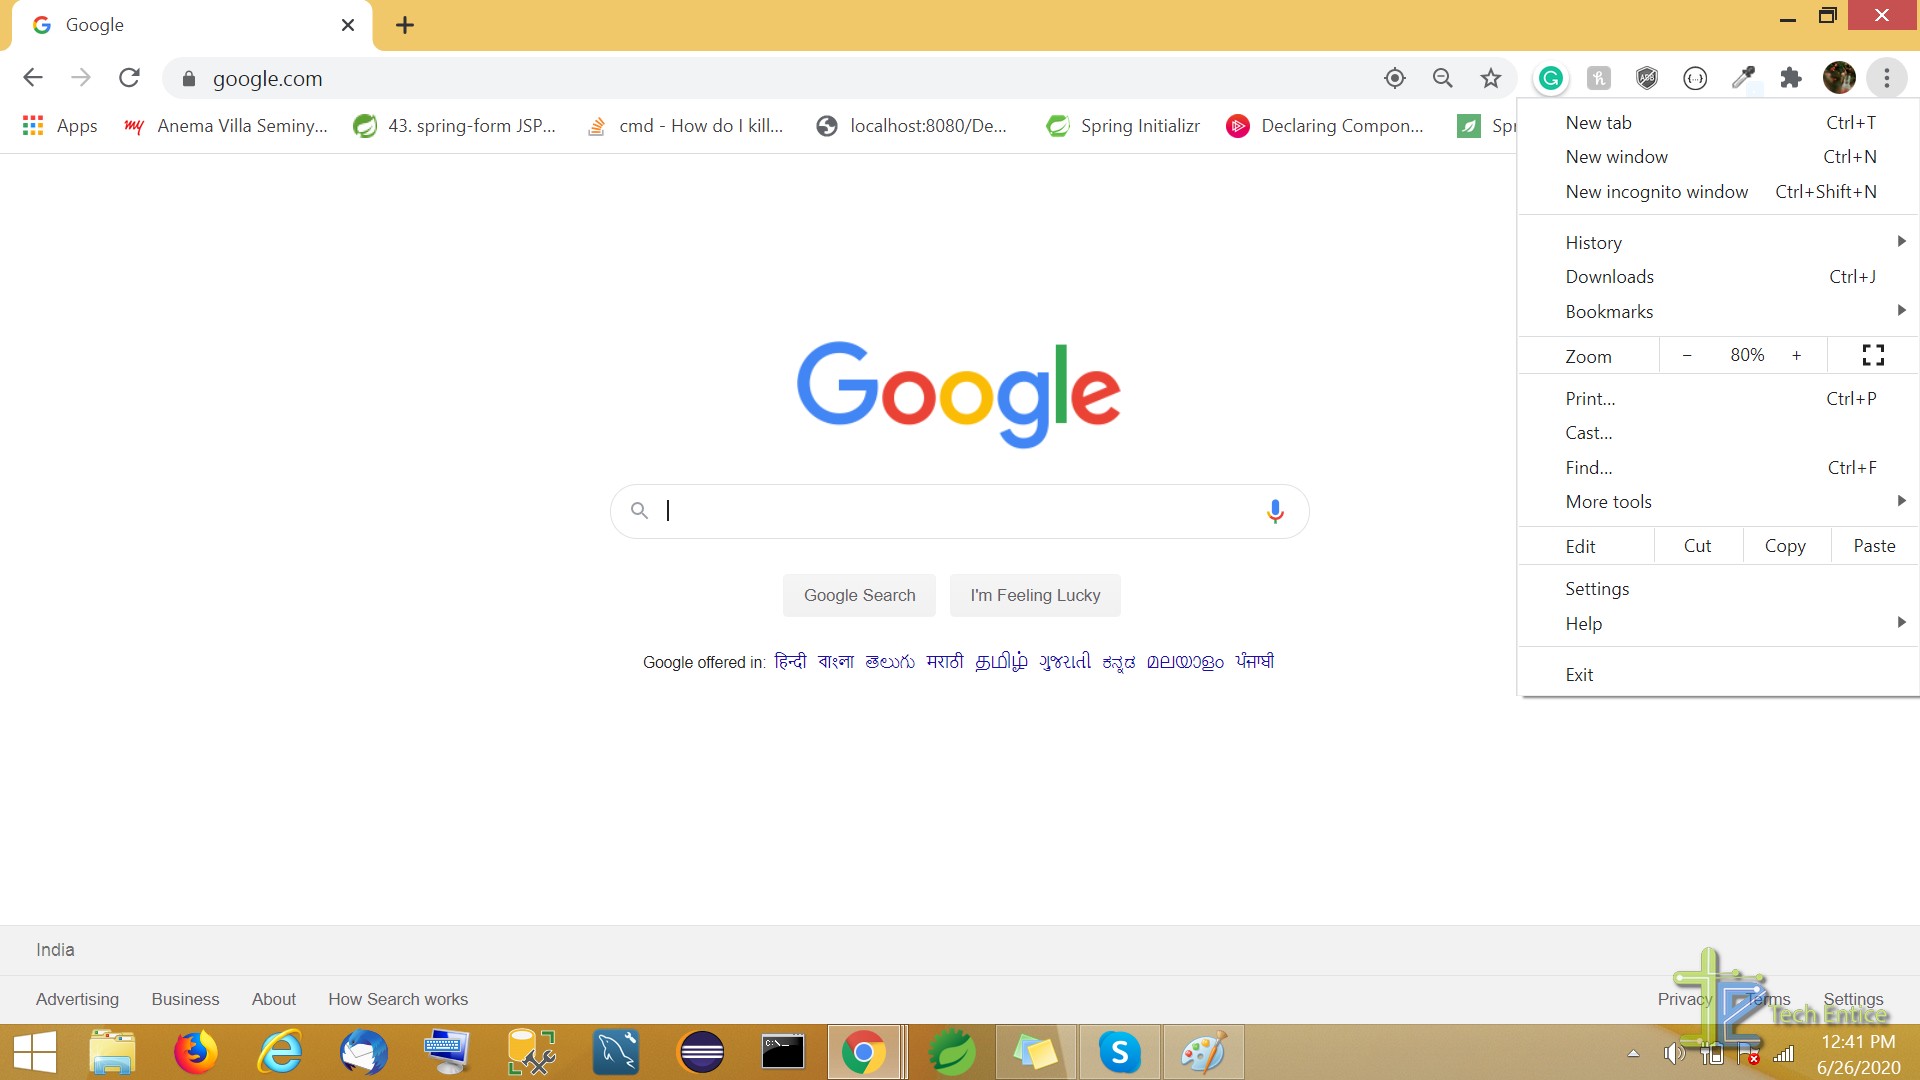 How to Change Your Wallpaper on Google Chrome: 11 Steps